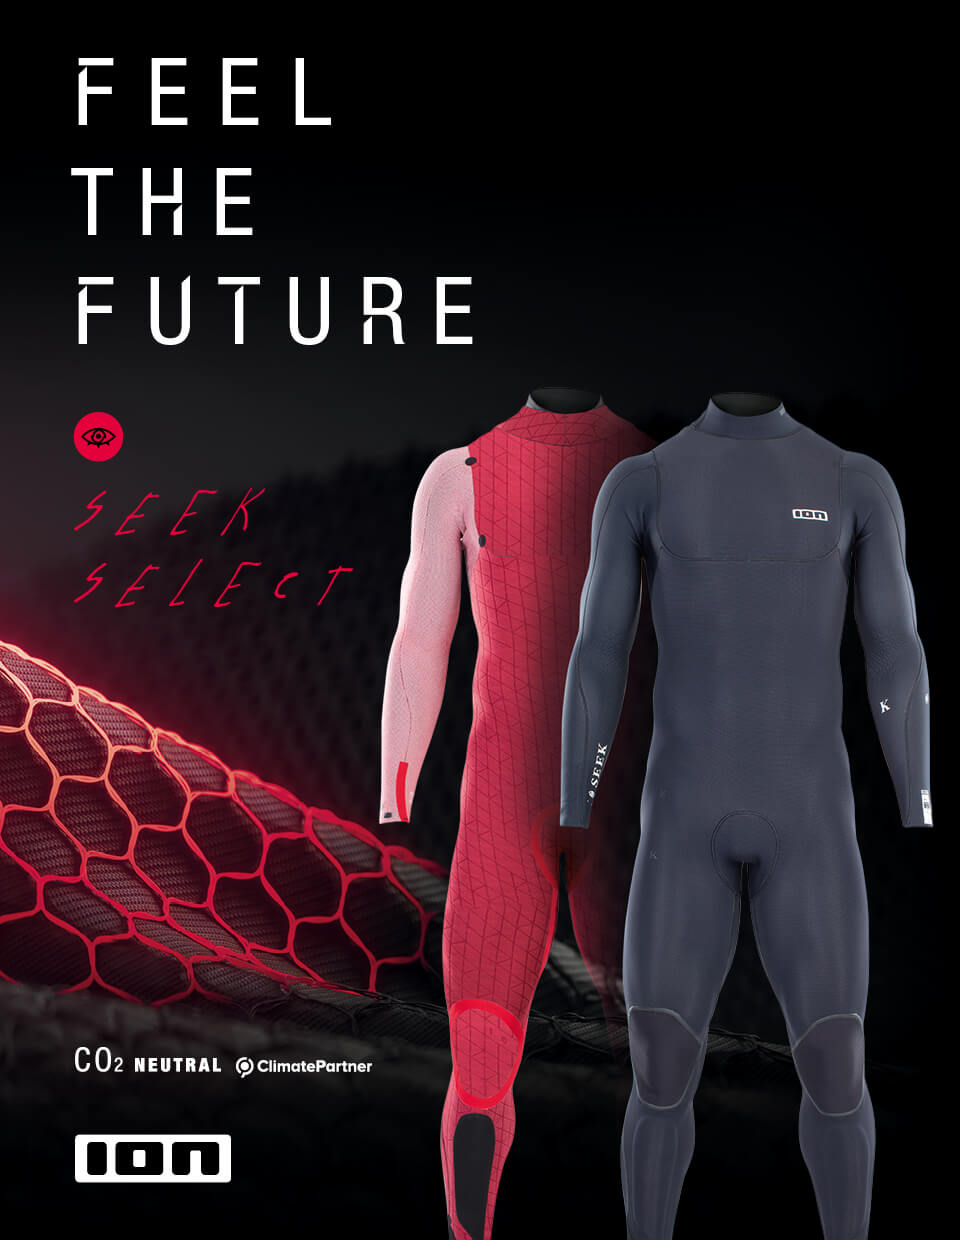 210104 ION Seek Select 960x1240 1 1 - ION introduce the stretchiest wetsuits ever made